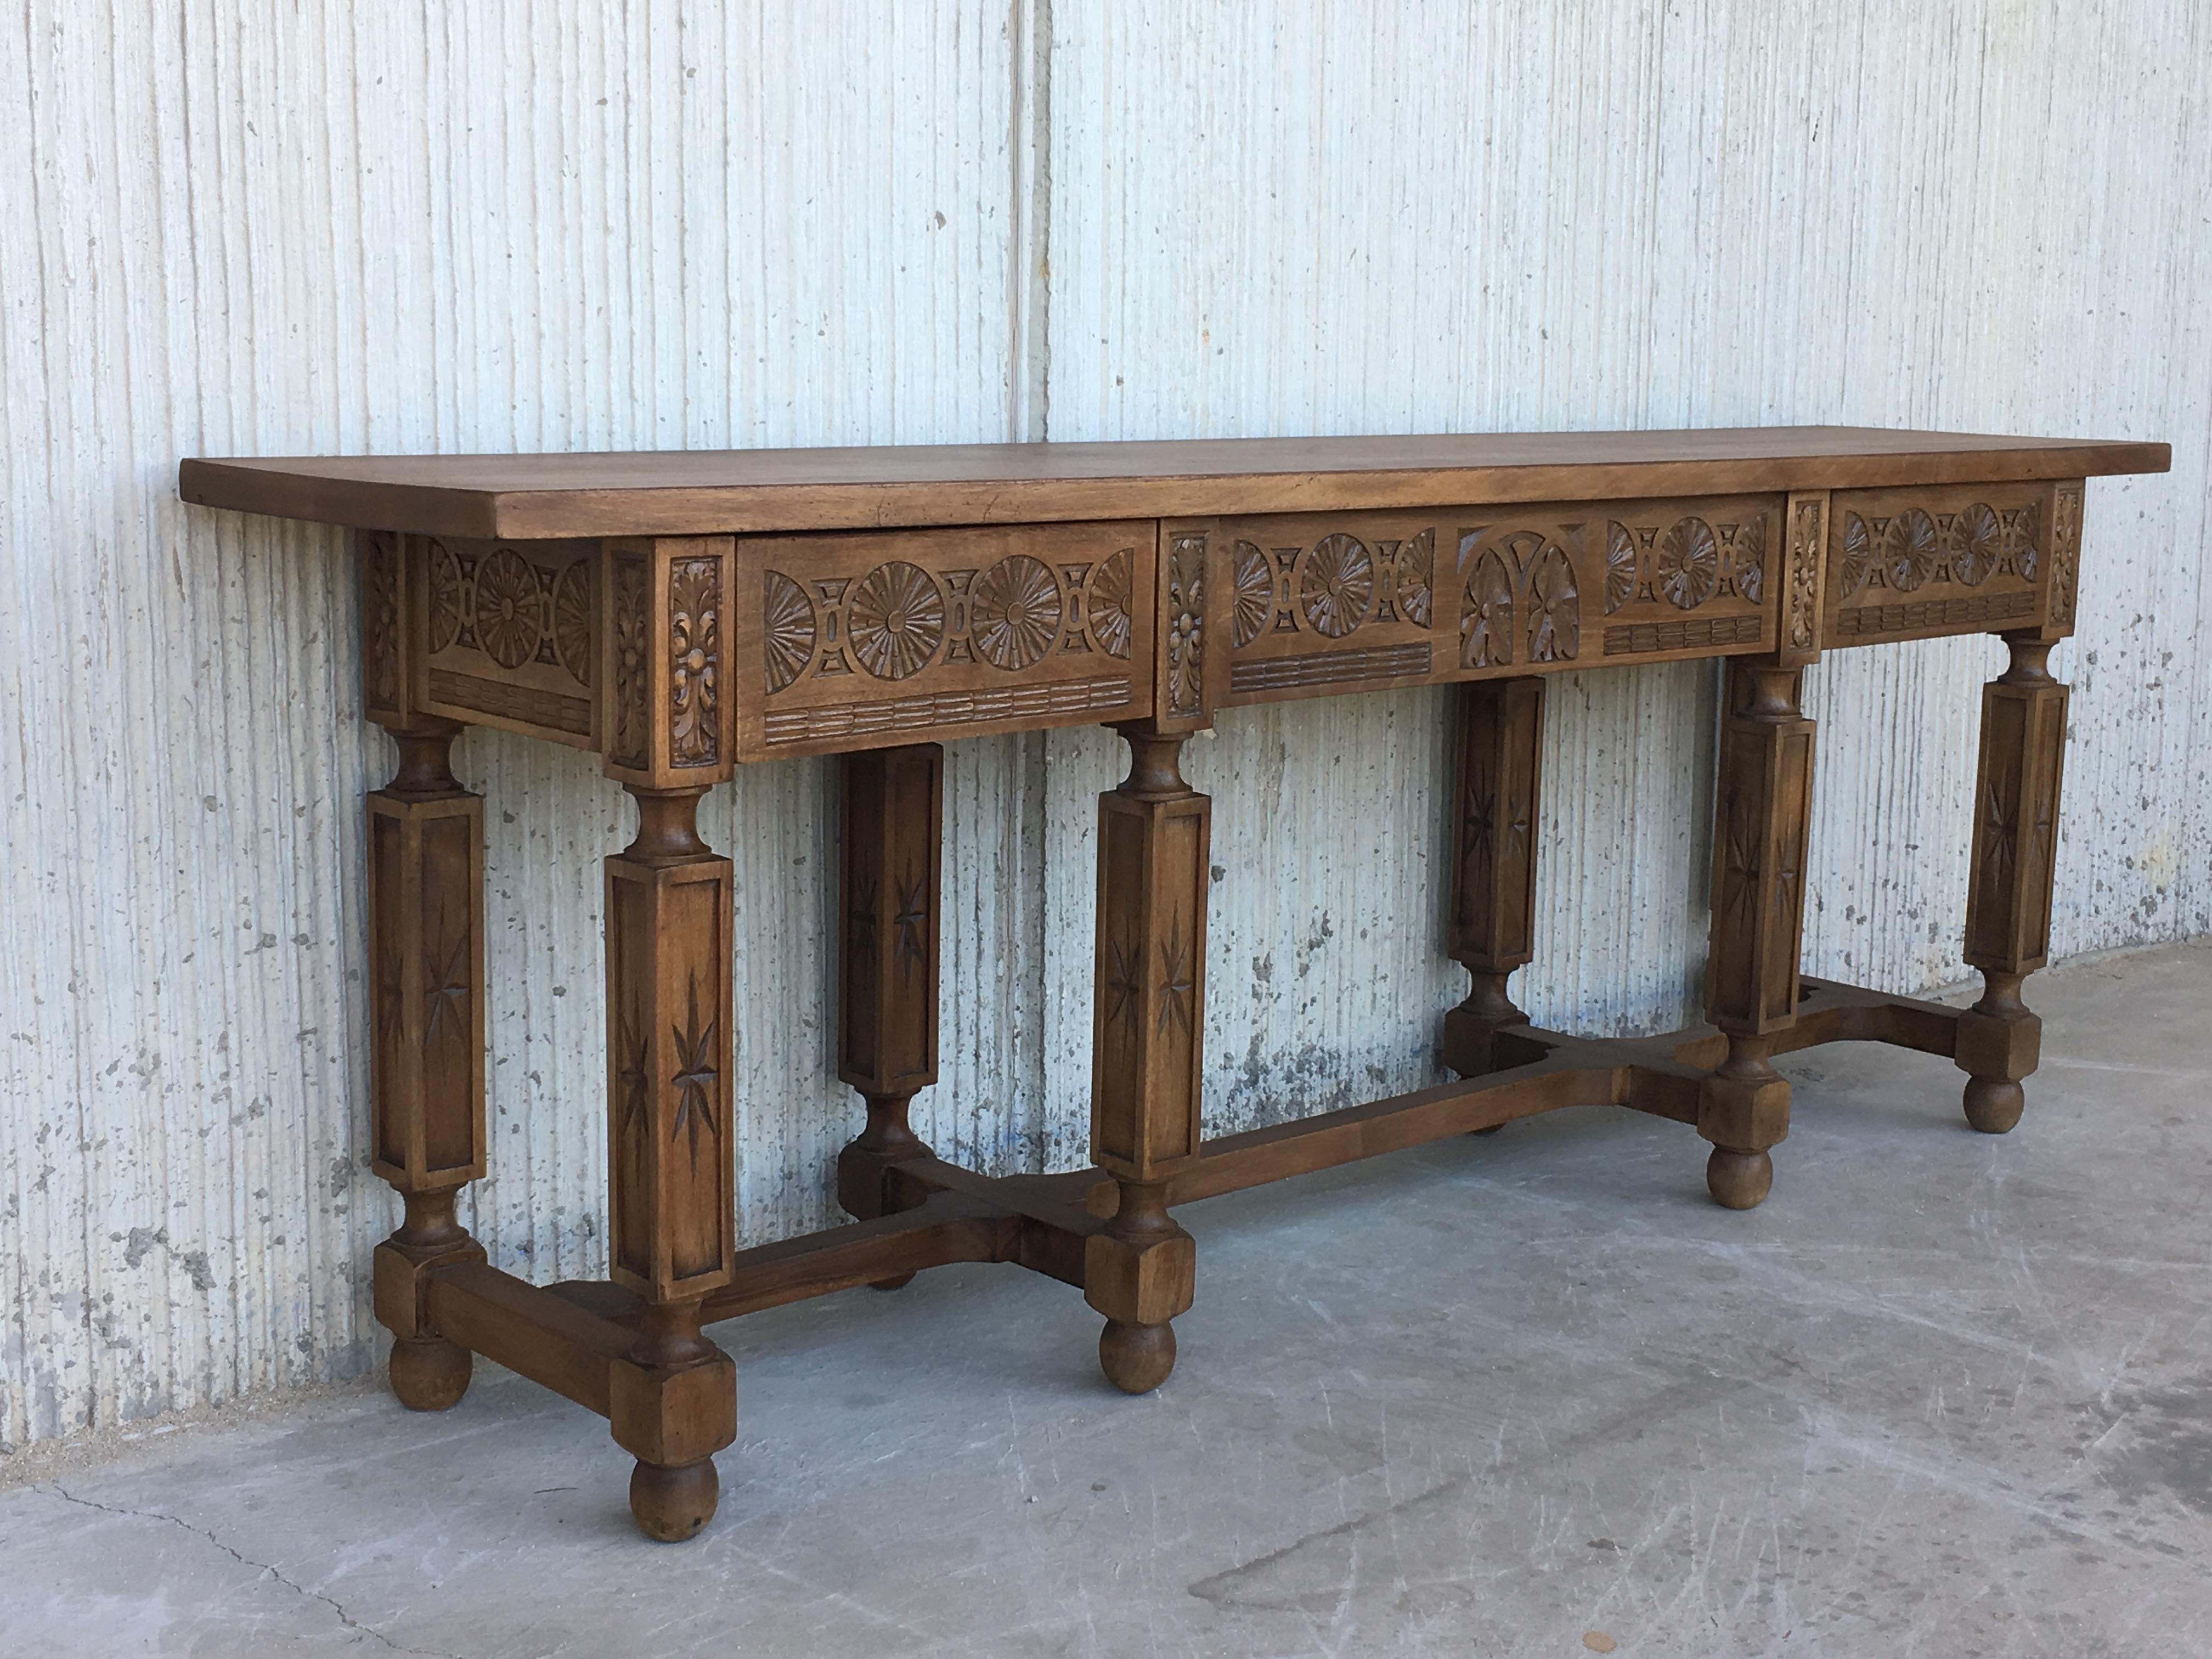 19th Century Spanish Carved Walnut Bench or Low Table with Two Drawers (Barock)